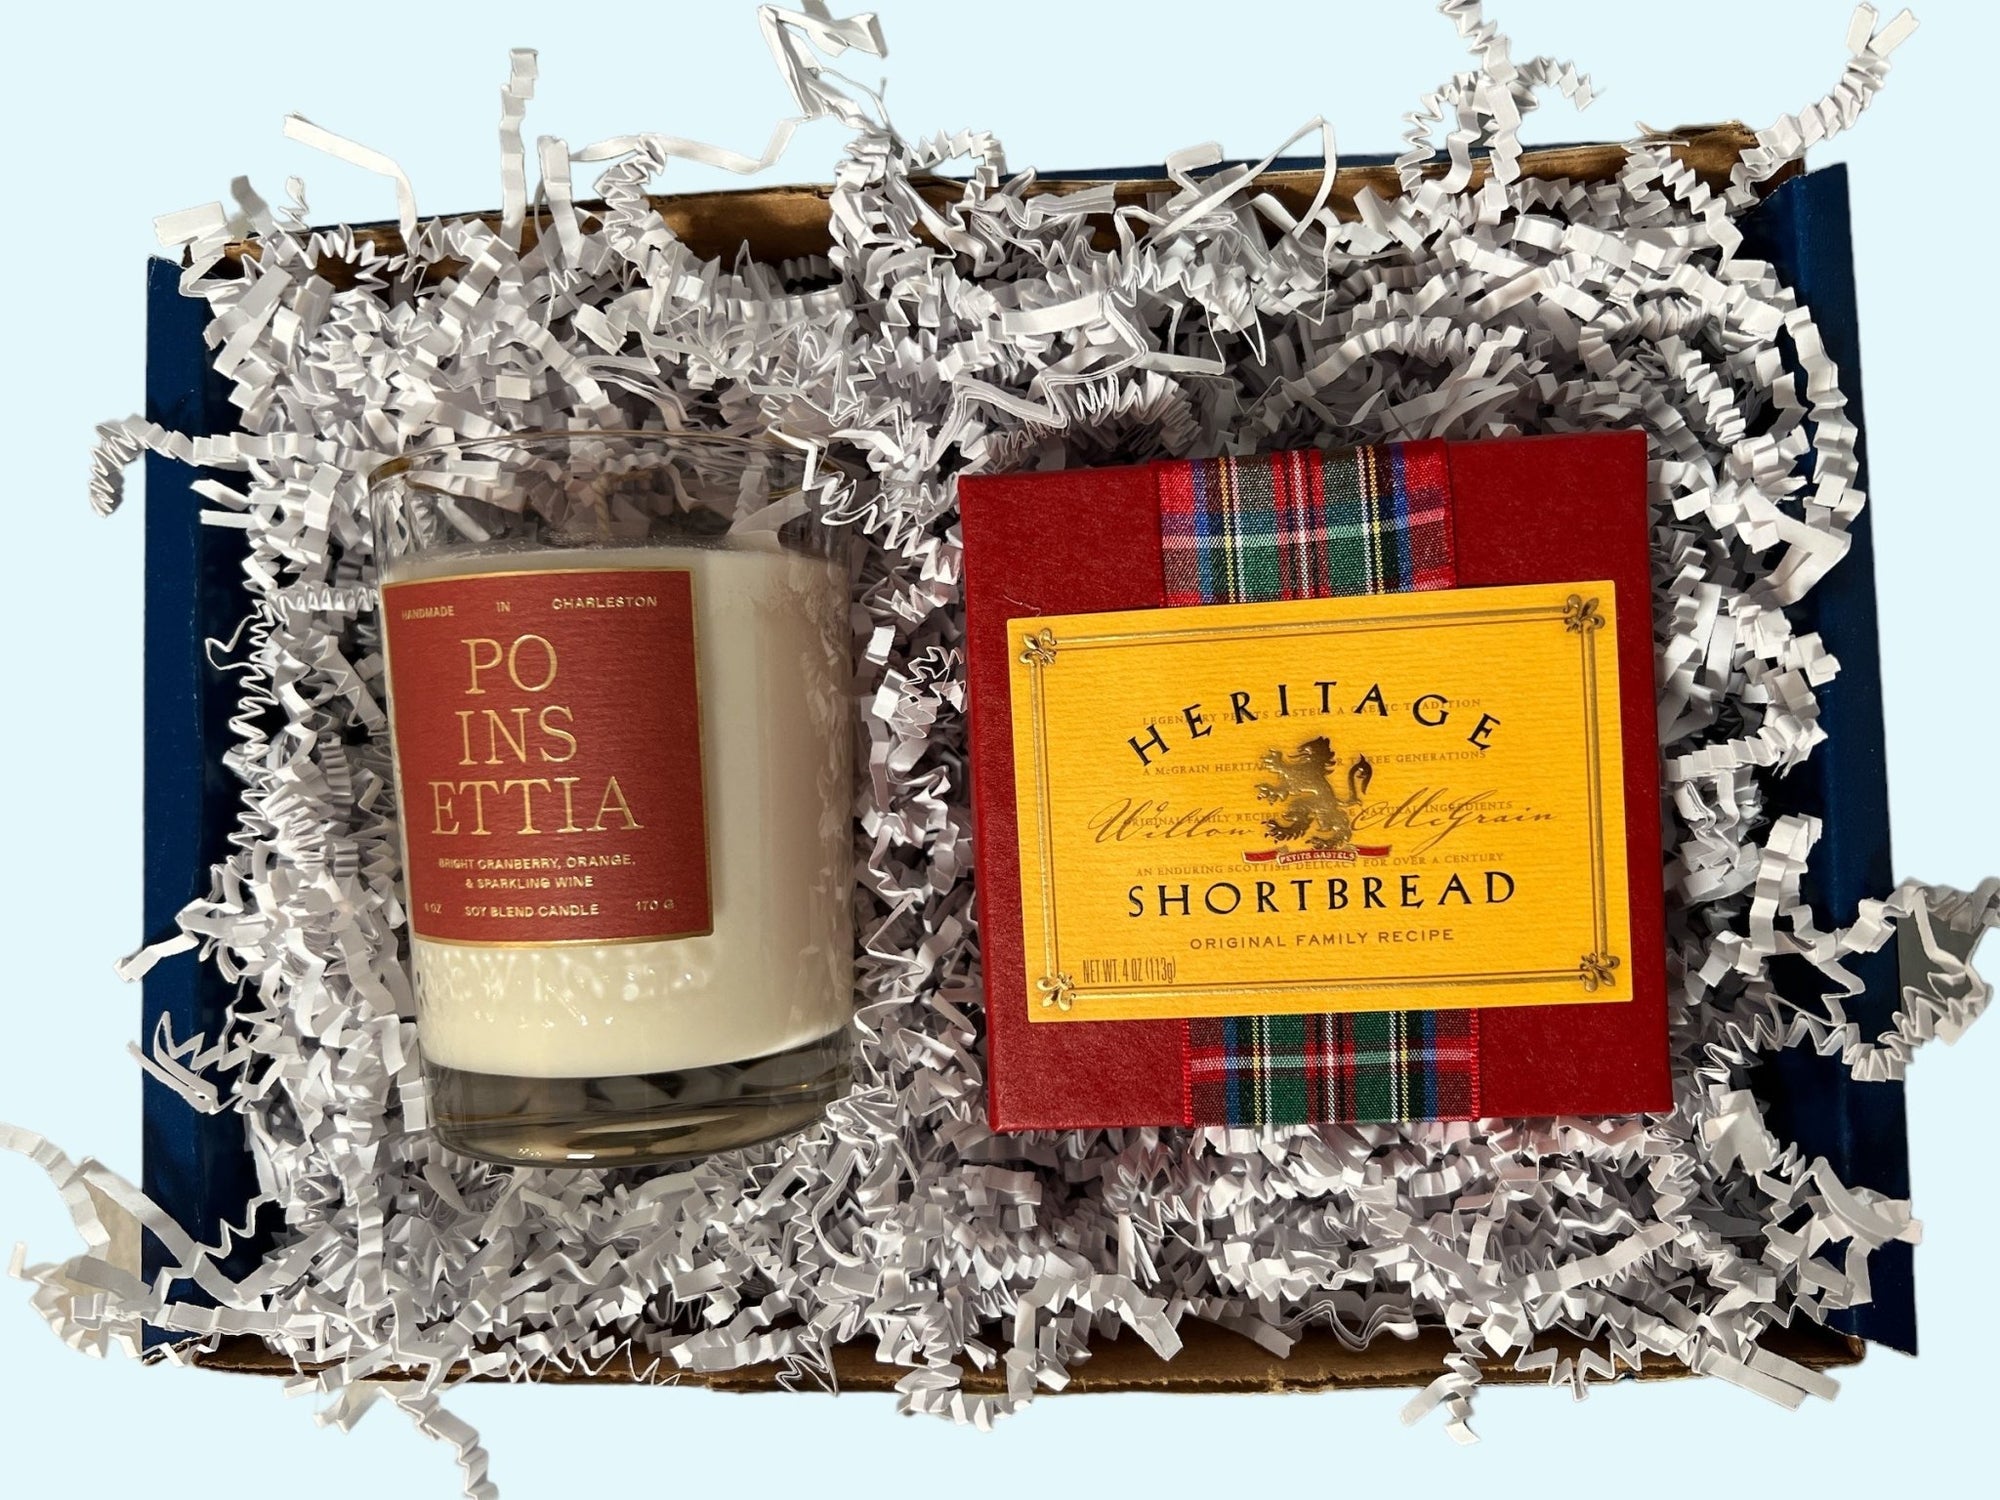 Perfect Pair: Rewined Poinsettia Candle + Heritage Shortbread Box - Essentially Charleston